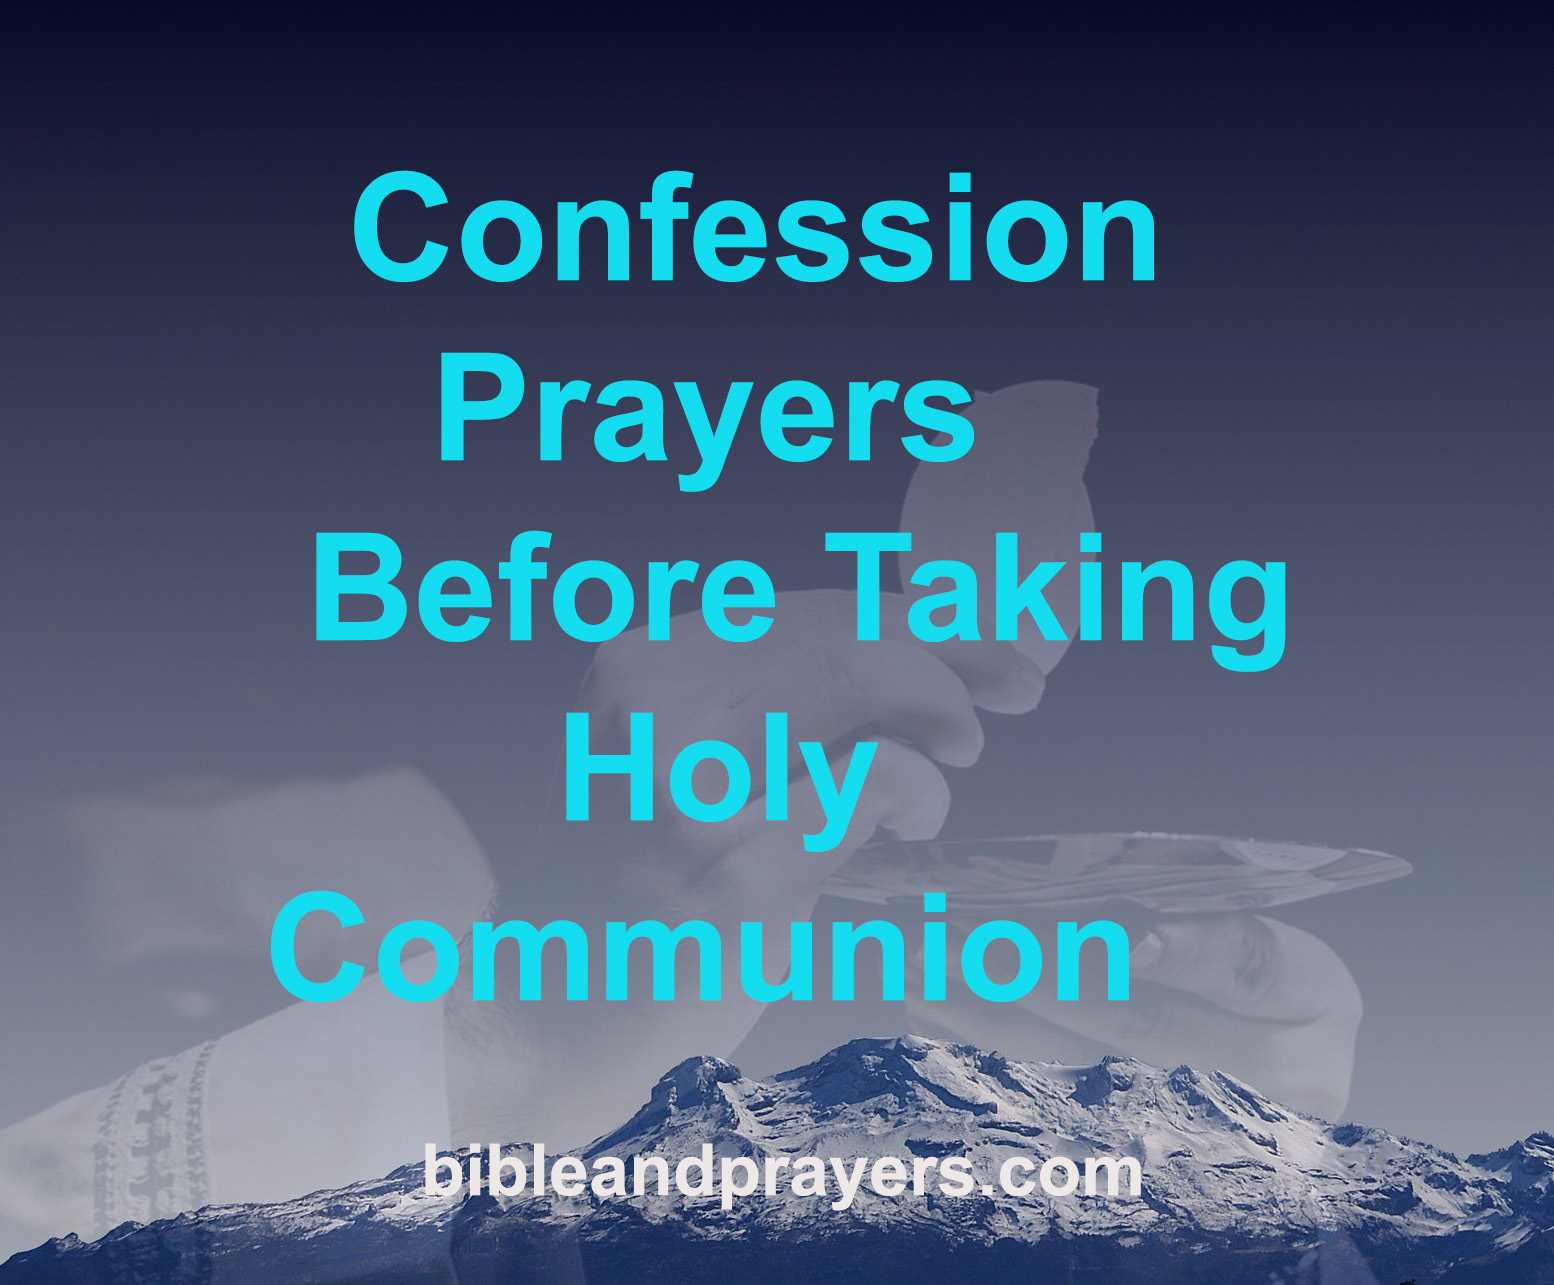 Confession Prayers Before Taking Holy Communion